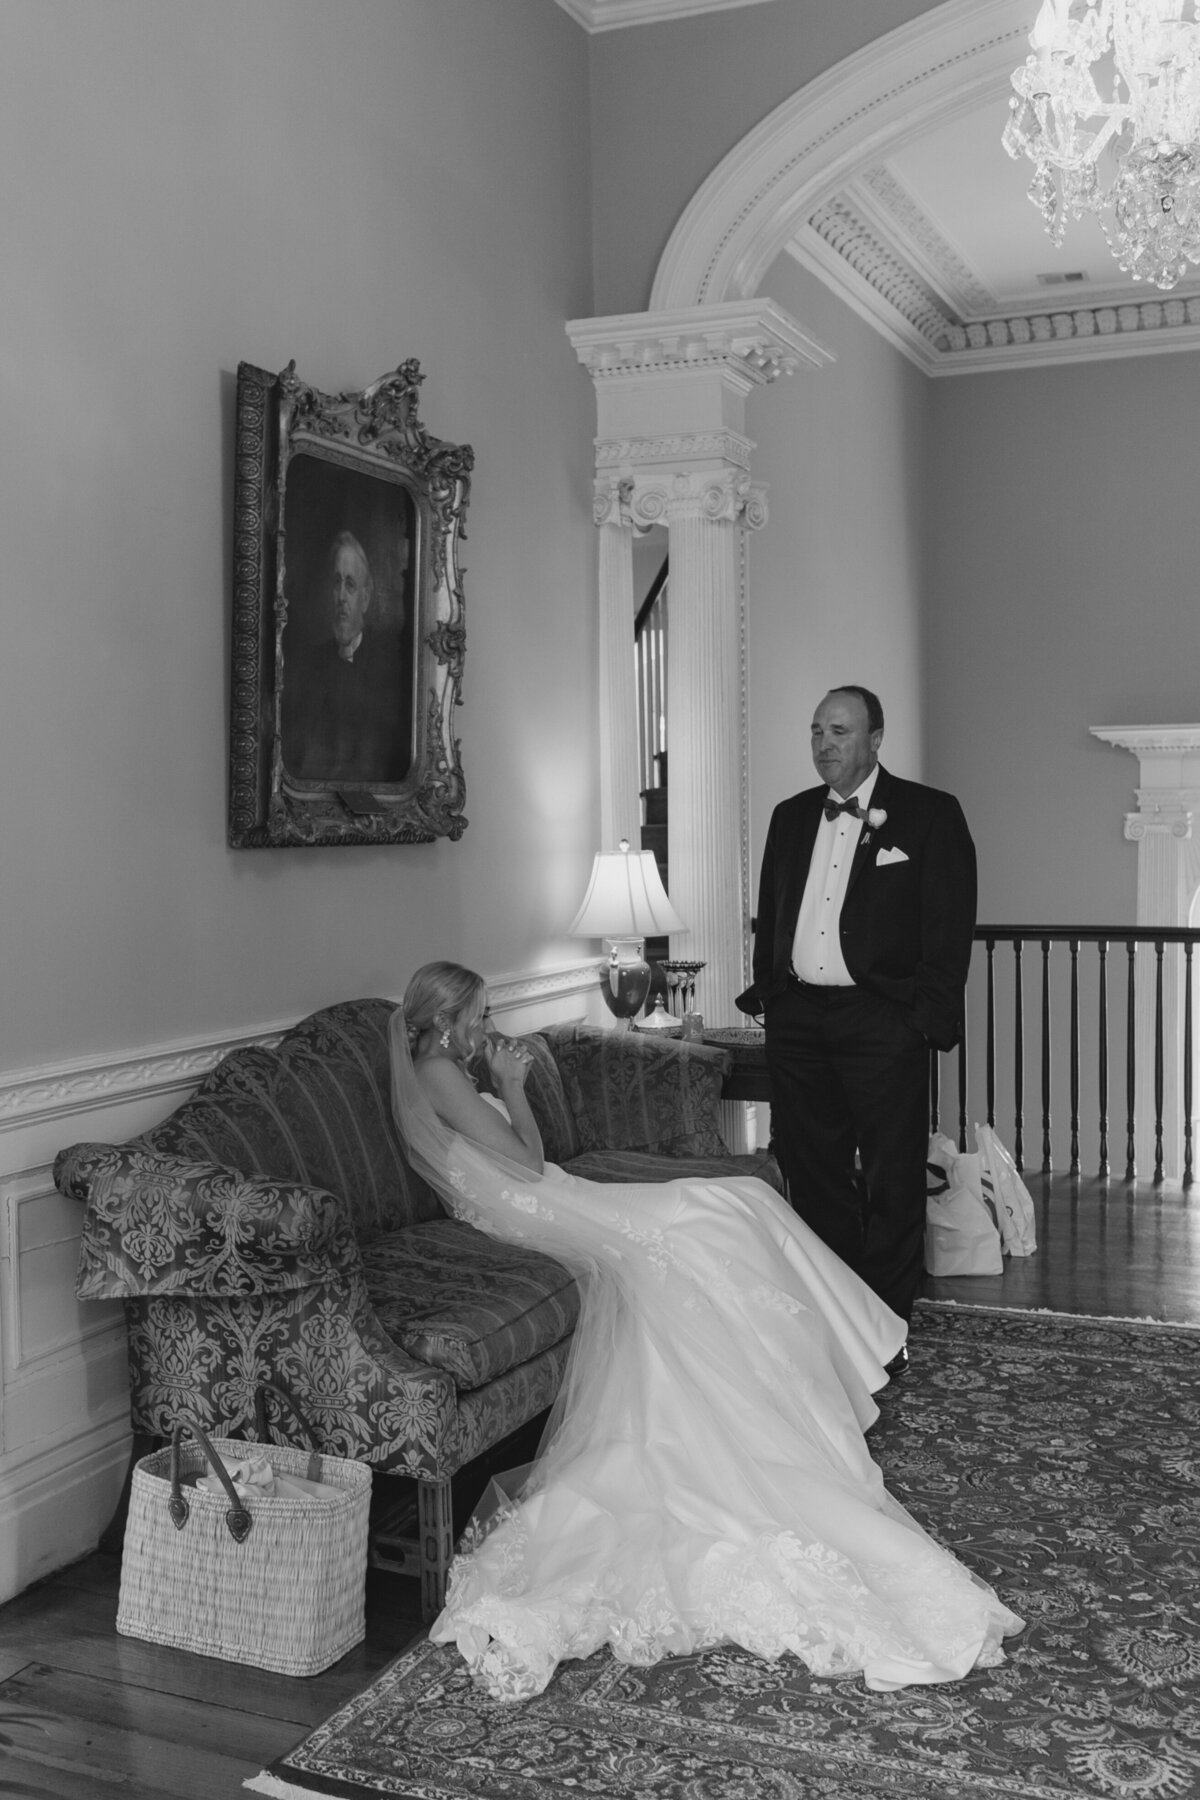 Moments before Thomas Bennett House spring wedding ceremony father of the bride with daughter. Intimate candid black and white wedding photo. Kailee DiMeglio Photography.